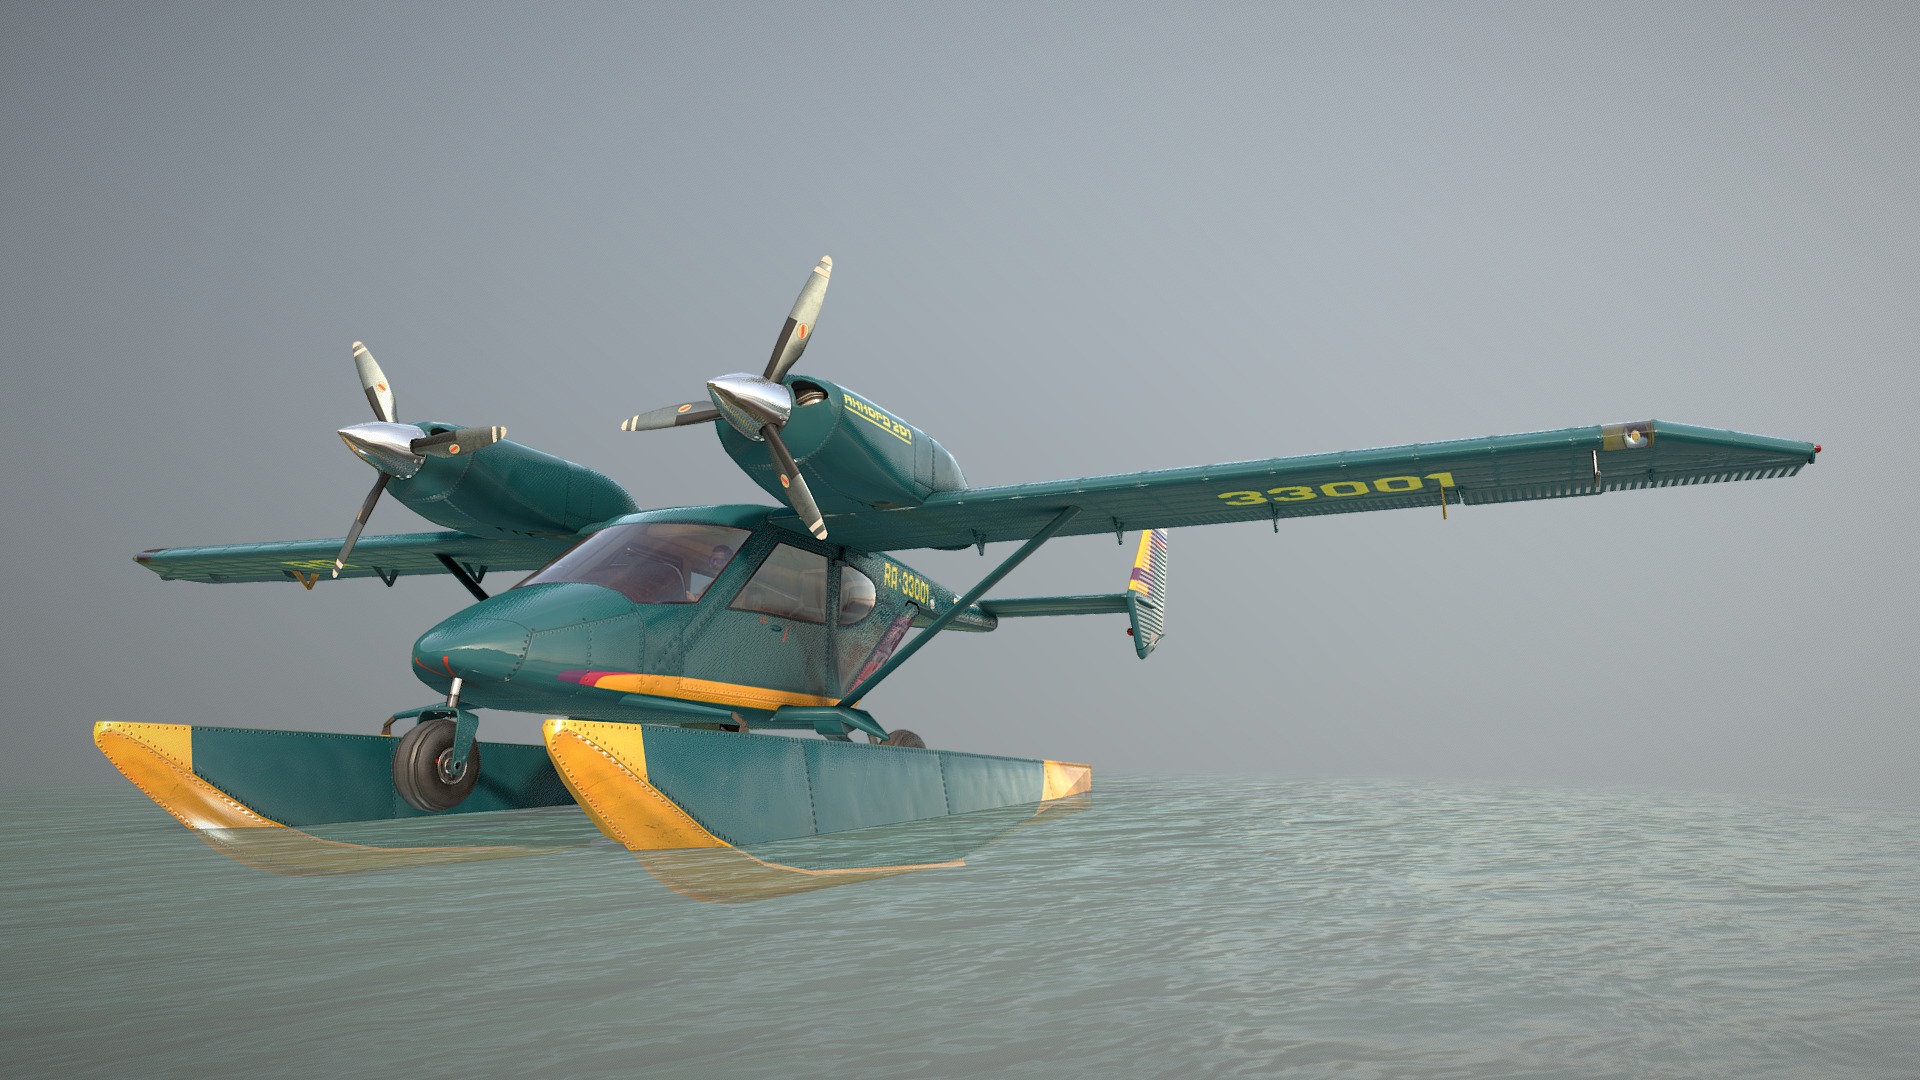 3D model Accord-201 Floatsplane GreenYellow Livery - This is a 3D model of the Accord-201 Floatsplane GreenYellow Livery. The 3D model is about a plane flying over water.